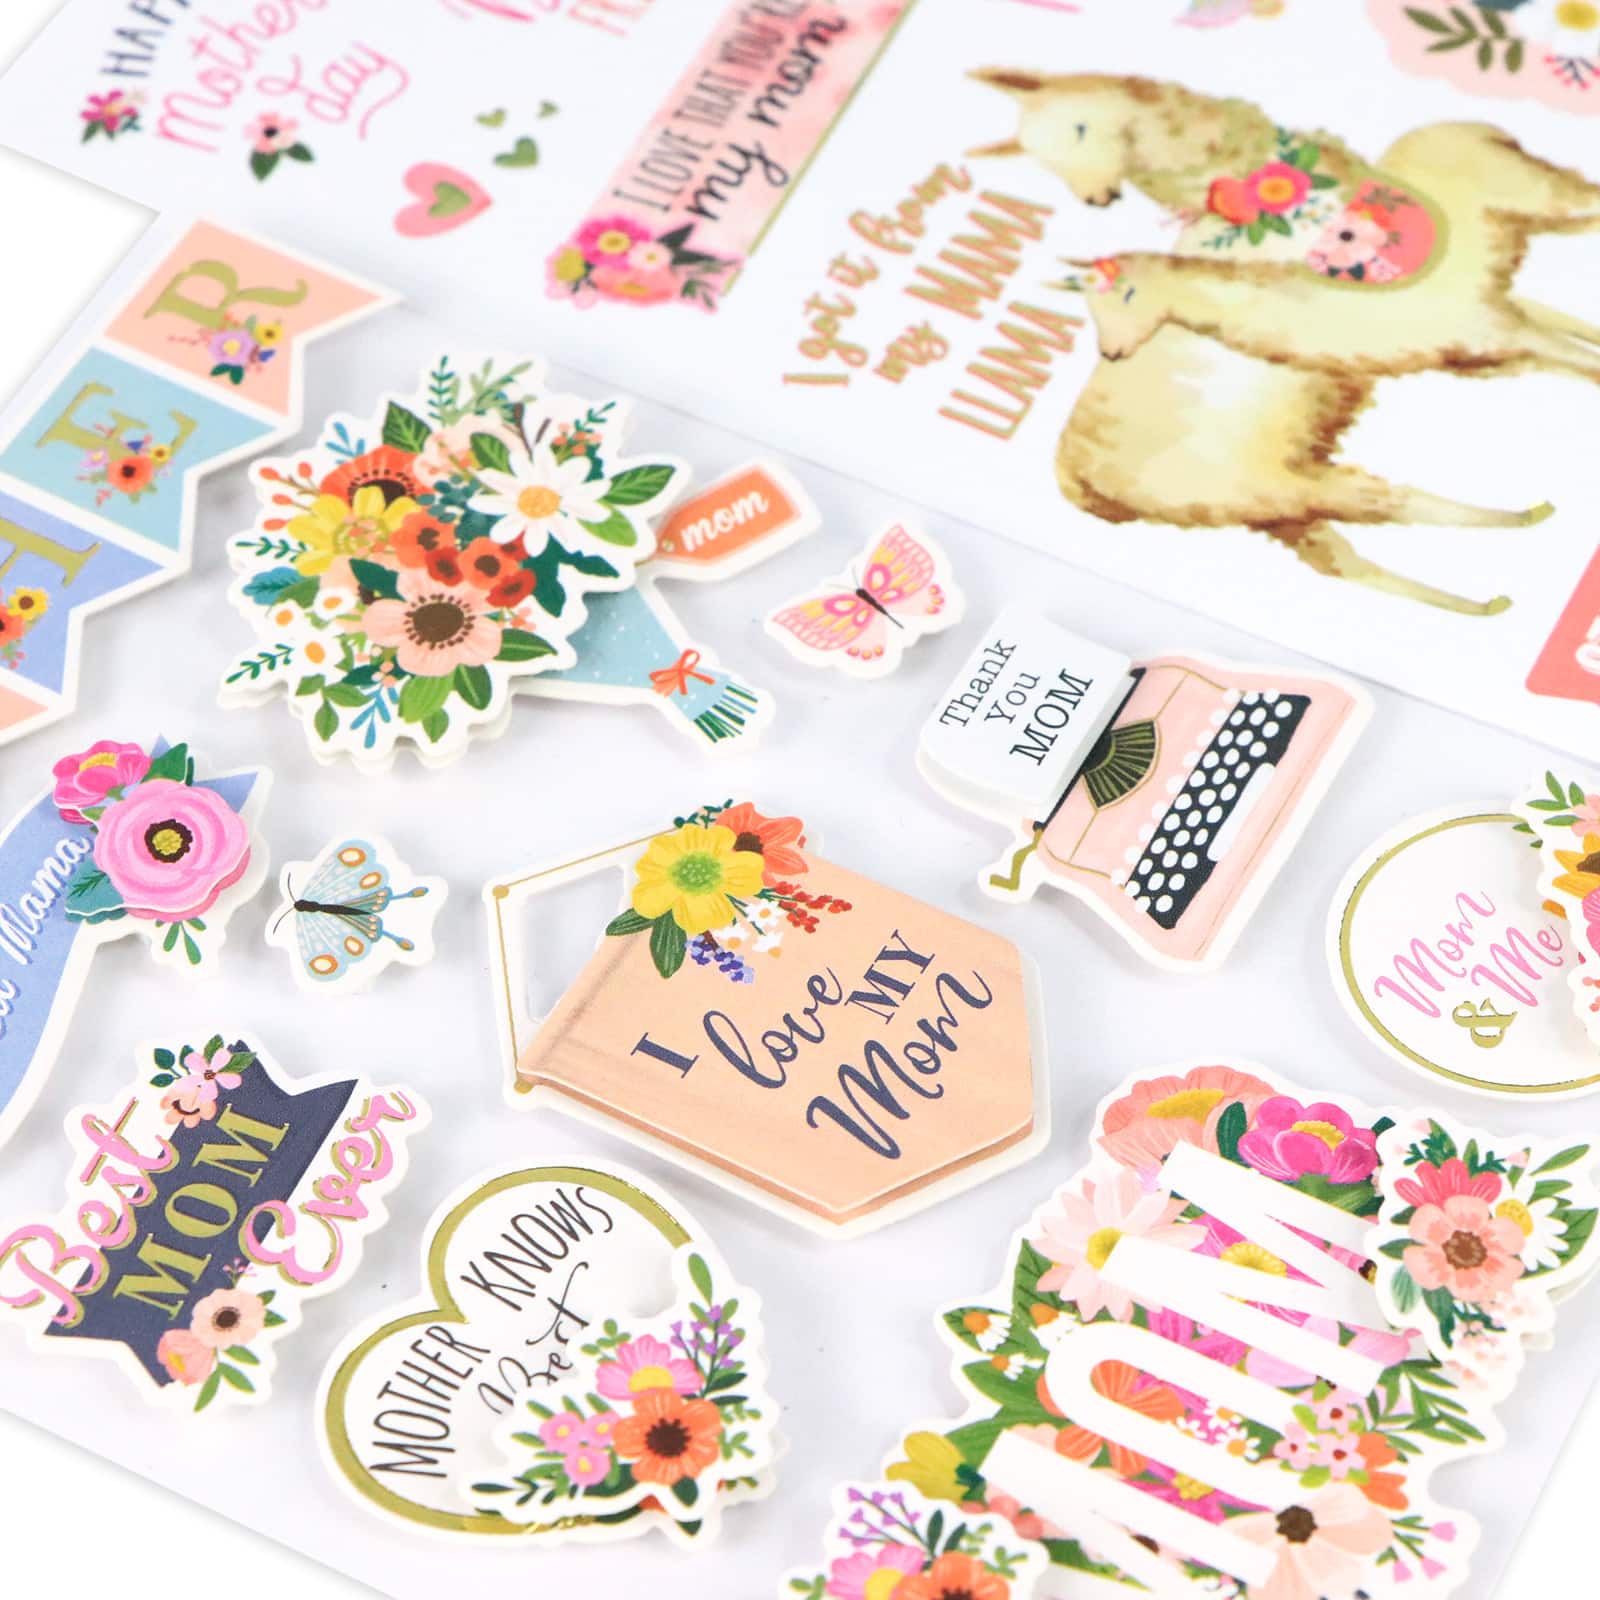 12 Pack: Mother Stickers by Recollections&#x2122;